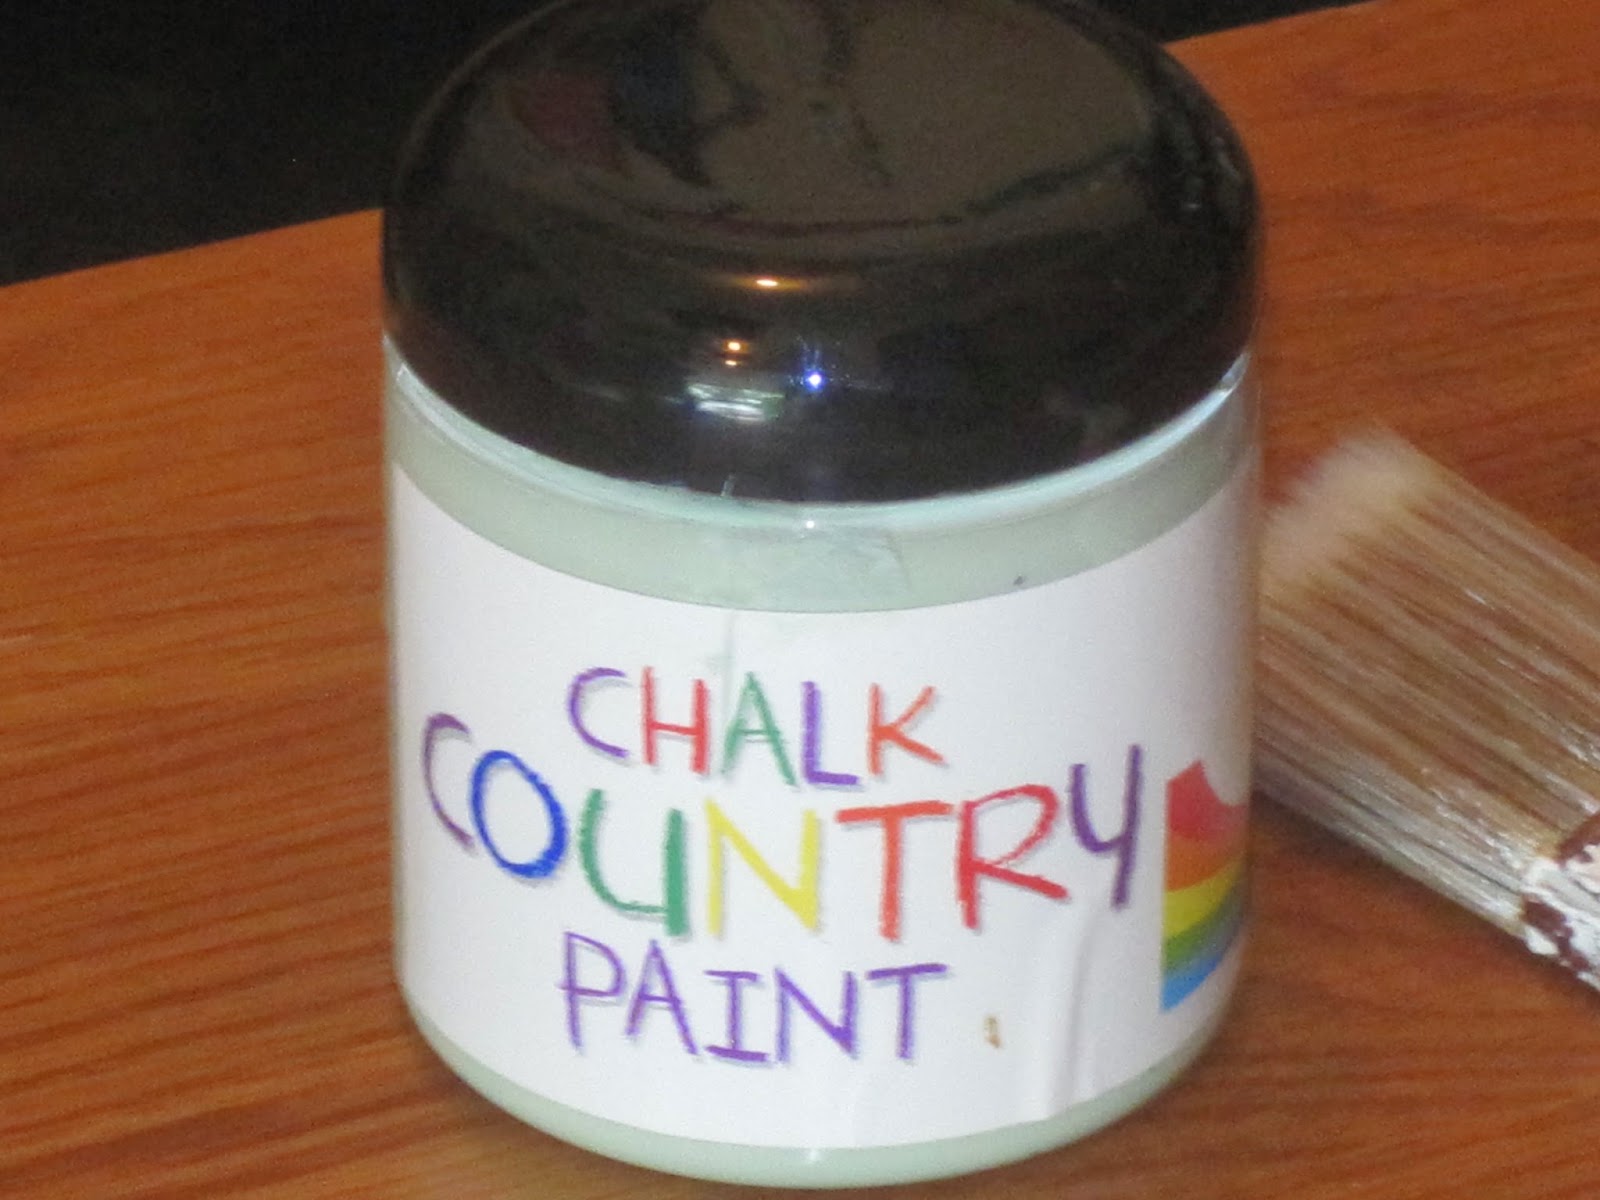 http://www.chalkcountry.com/#!about/c1ger